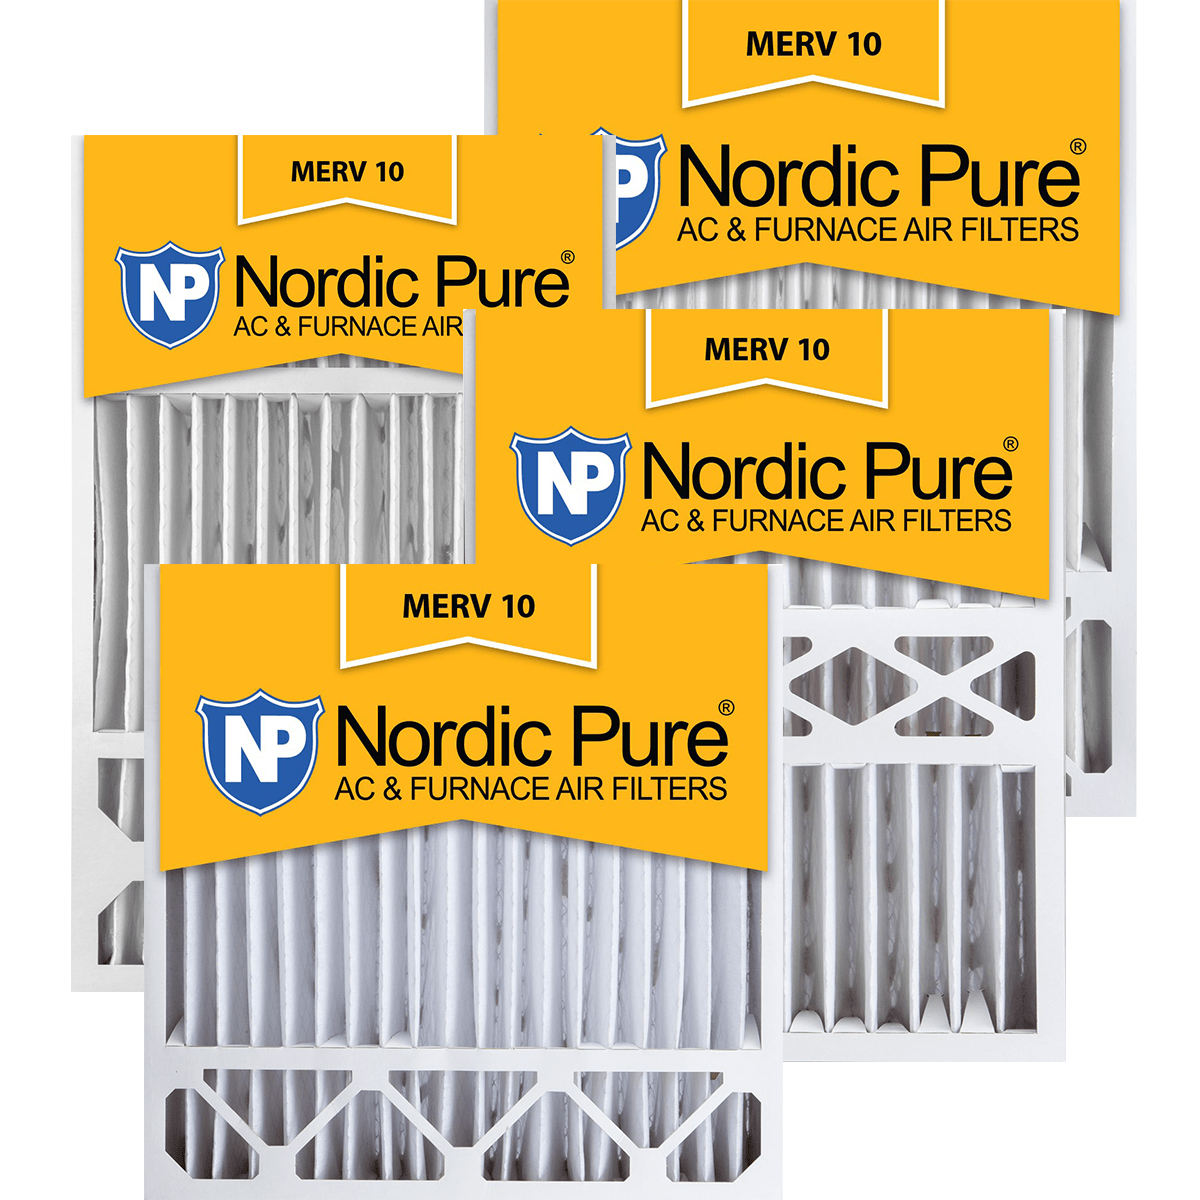 Nordic Pure Merv 10 5-in. Pleated Furnace Filters